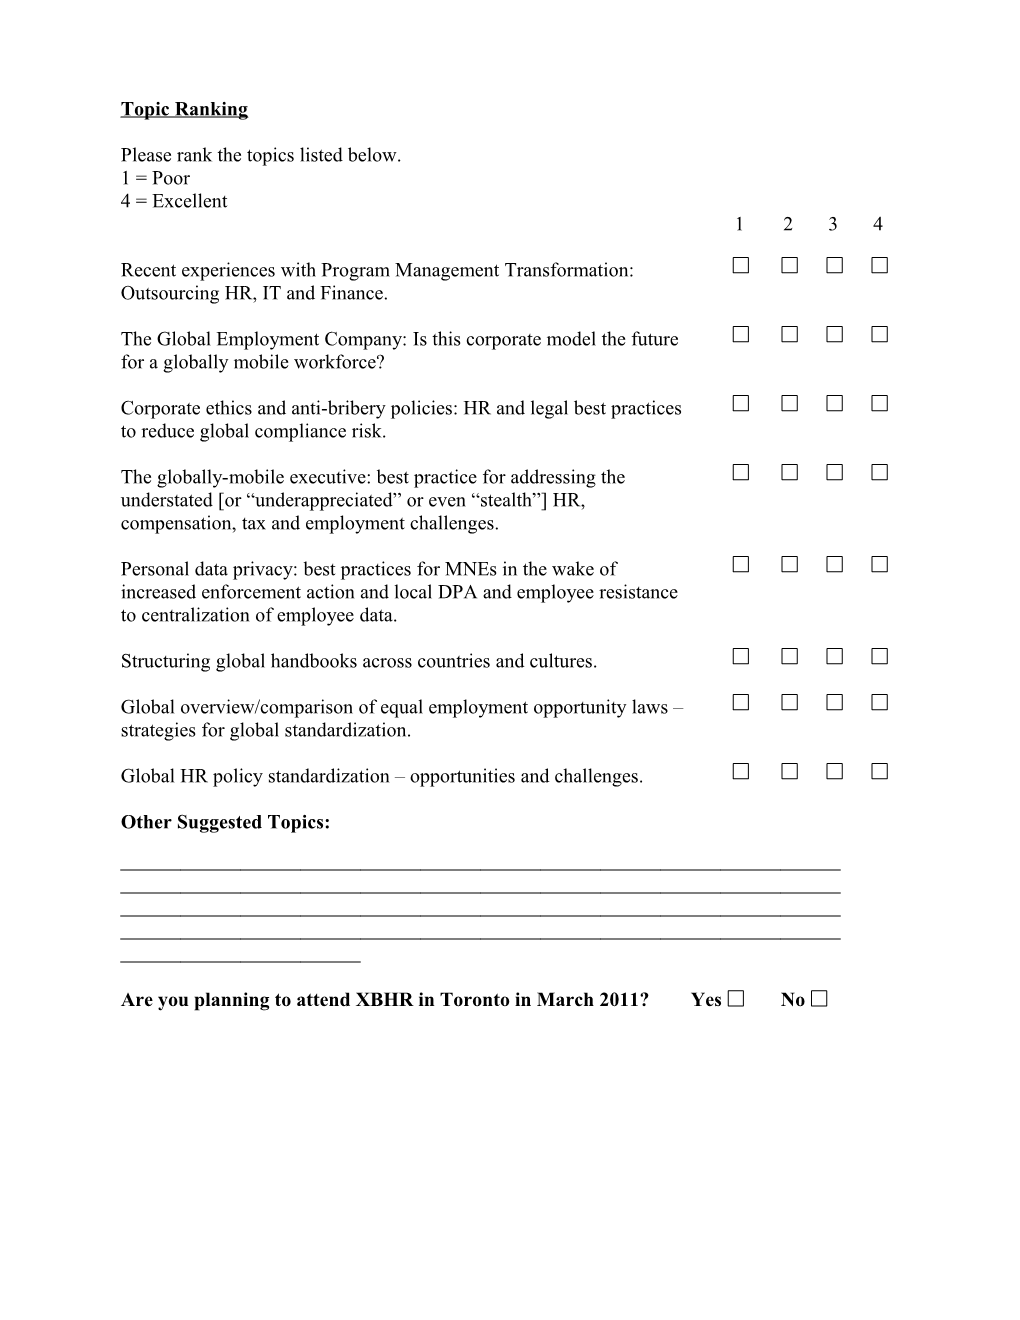 XBHR 2011 Conference Questionnaire